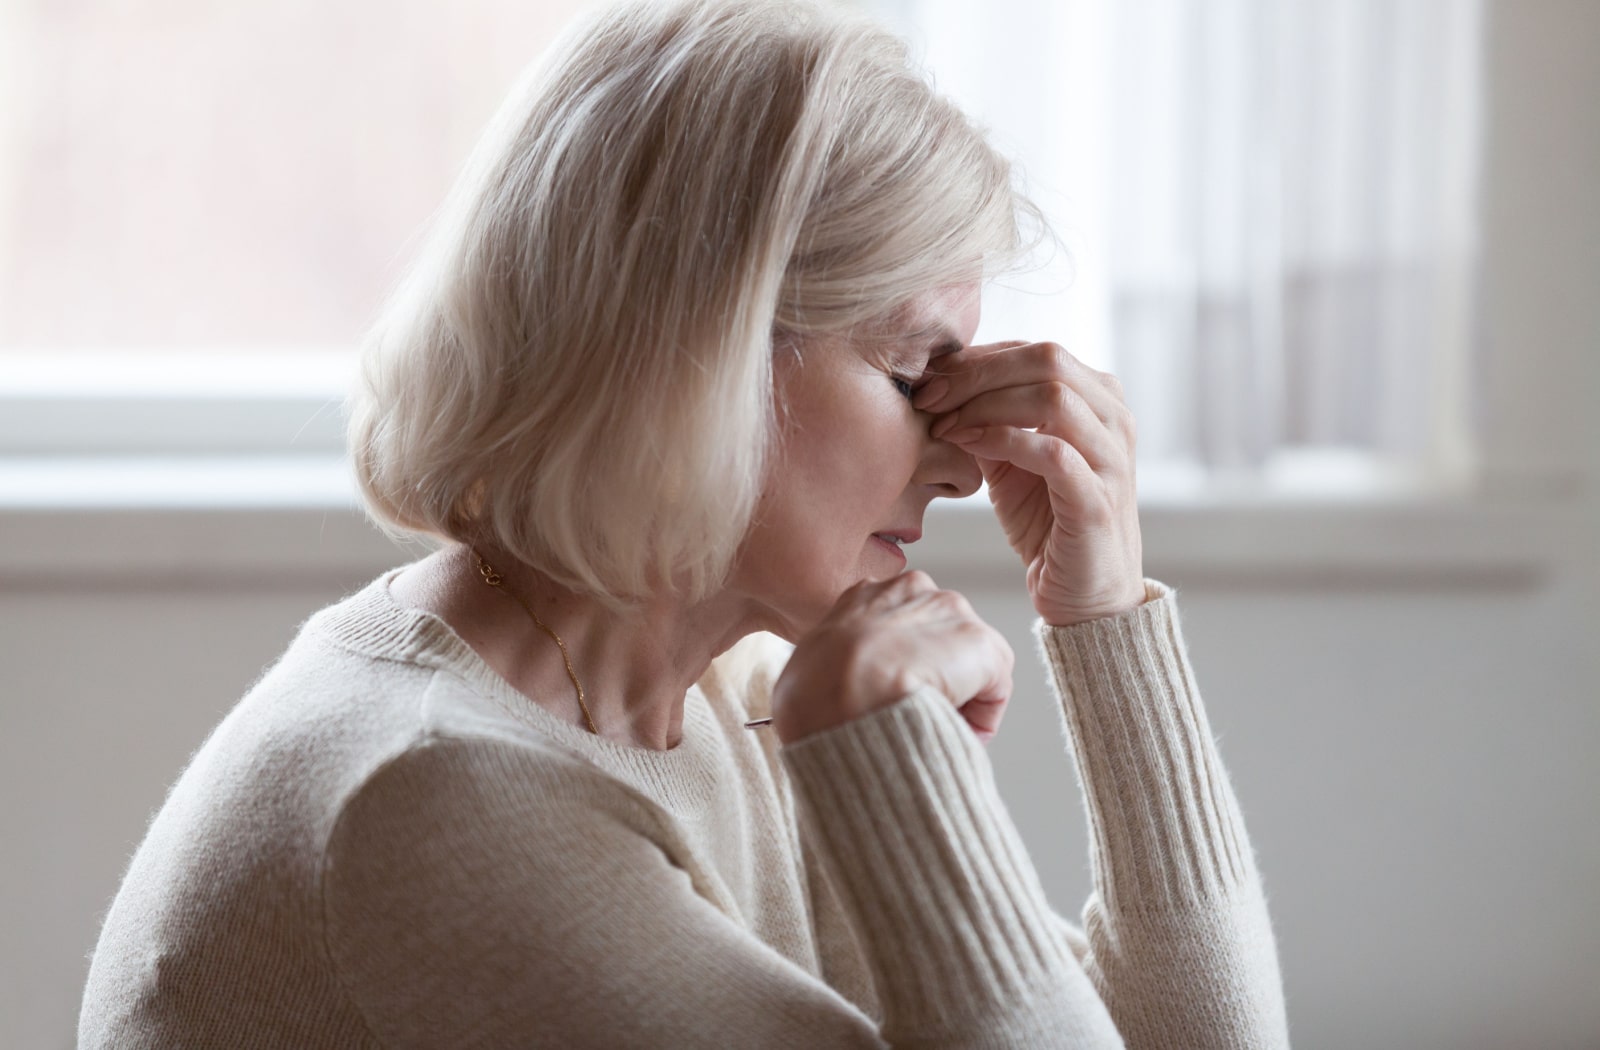 A senior woman is experiencing a severe headache due to developing Glaucoma